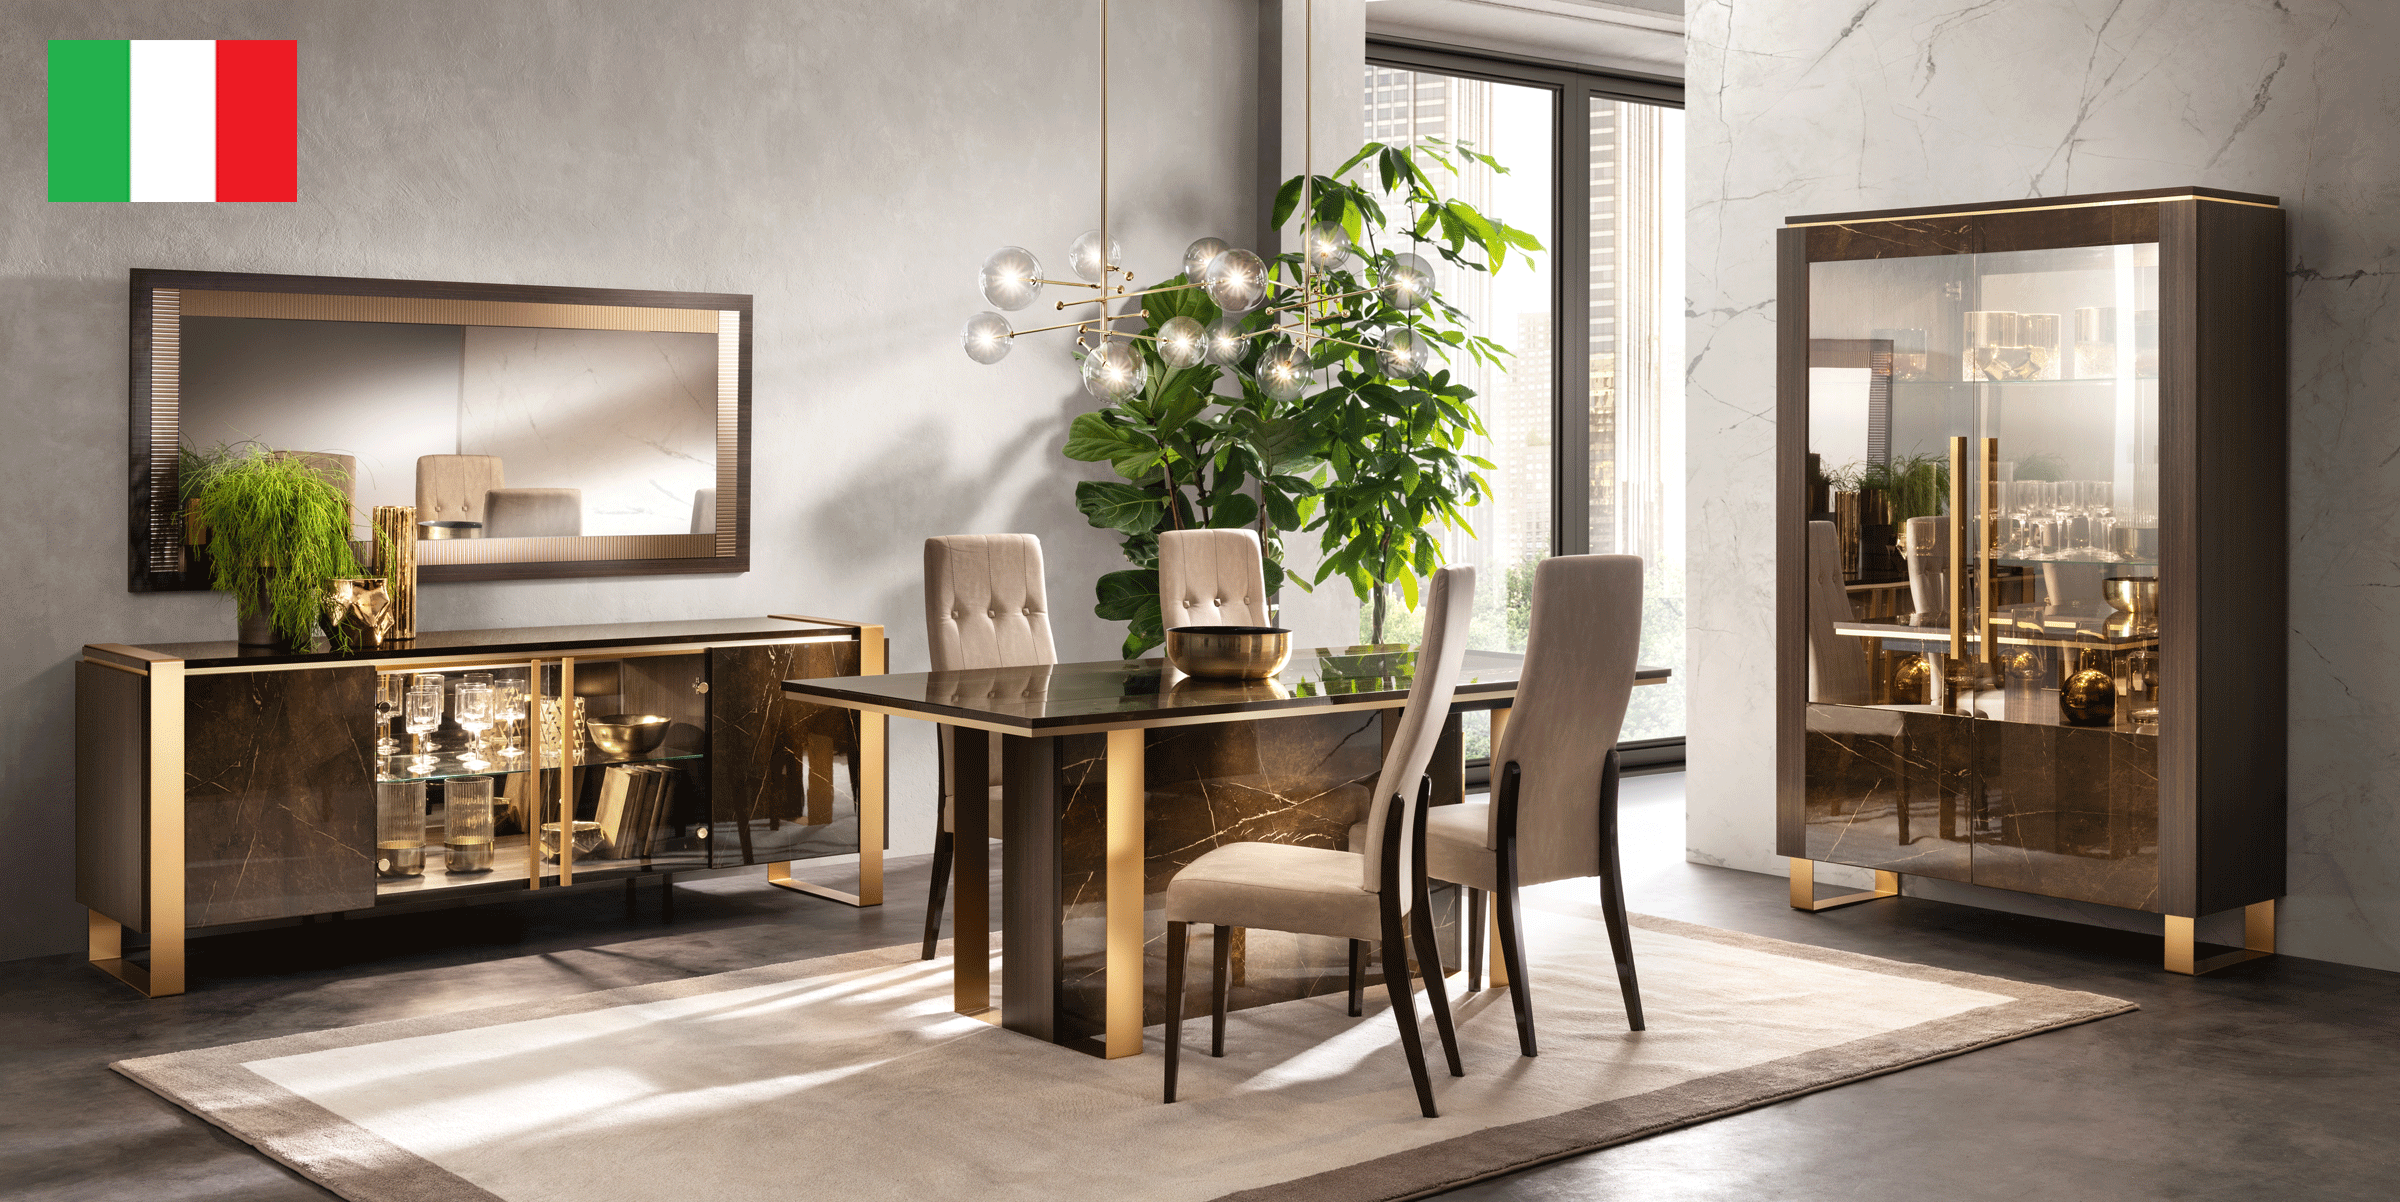 Dining Room Furniture Classic Dining Room Sets Essenza Dining by Arredoclassic, Italy